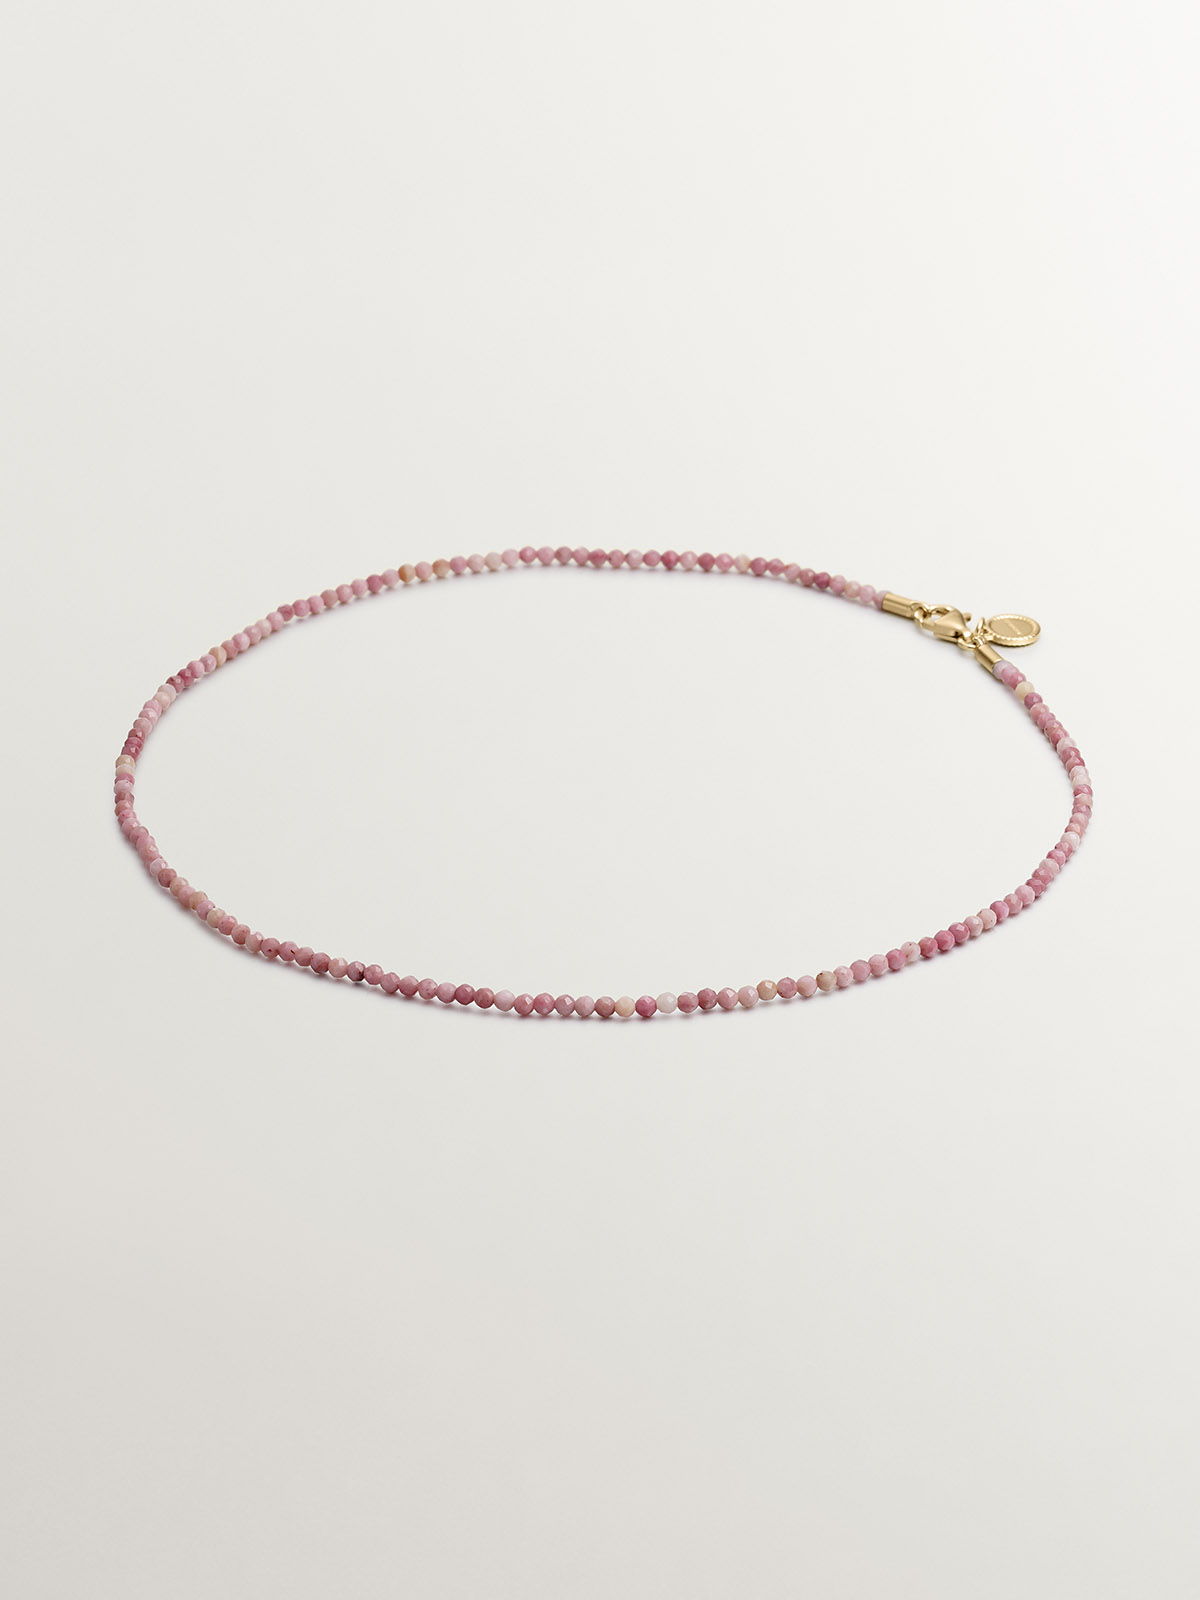 925 silver necklace bathed in 18K yellow gold with pink rhodonite beads.